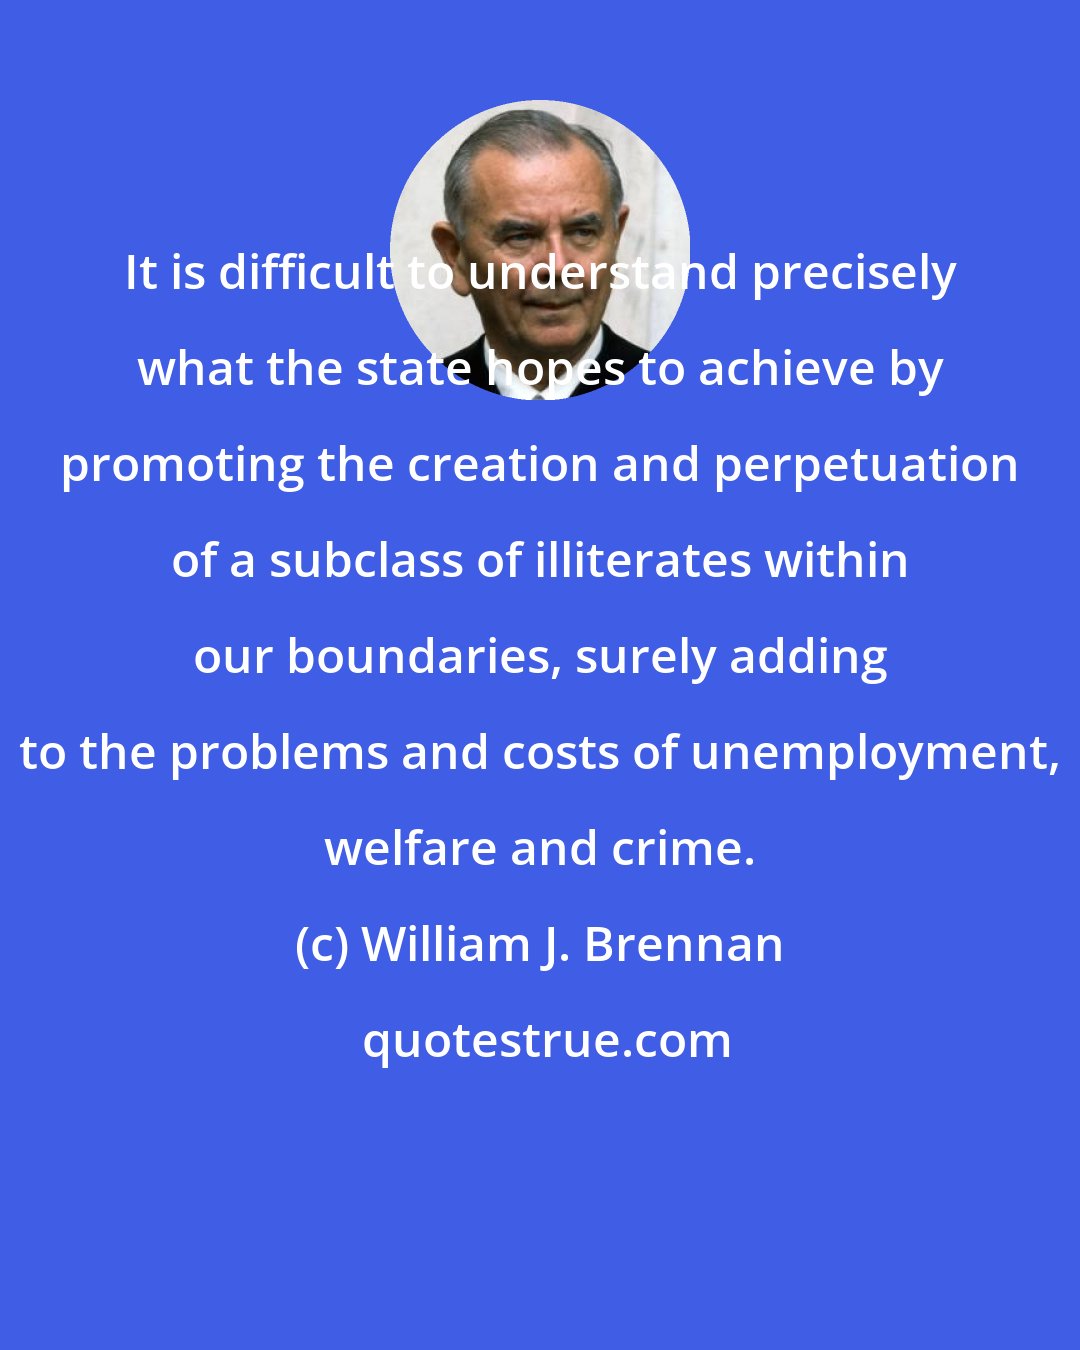 William J. Brennan: It is difficult to understand precisely what the state hopes to achieve by promoting the creation and perpetuation of a subclass of illiterates within our boundaries, surely adding to the problems and costs of unemployment, welfare and crime.